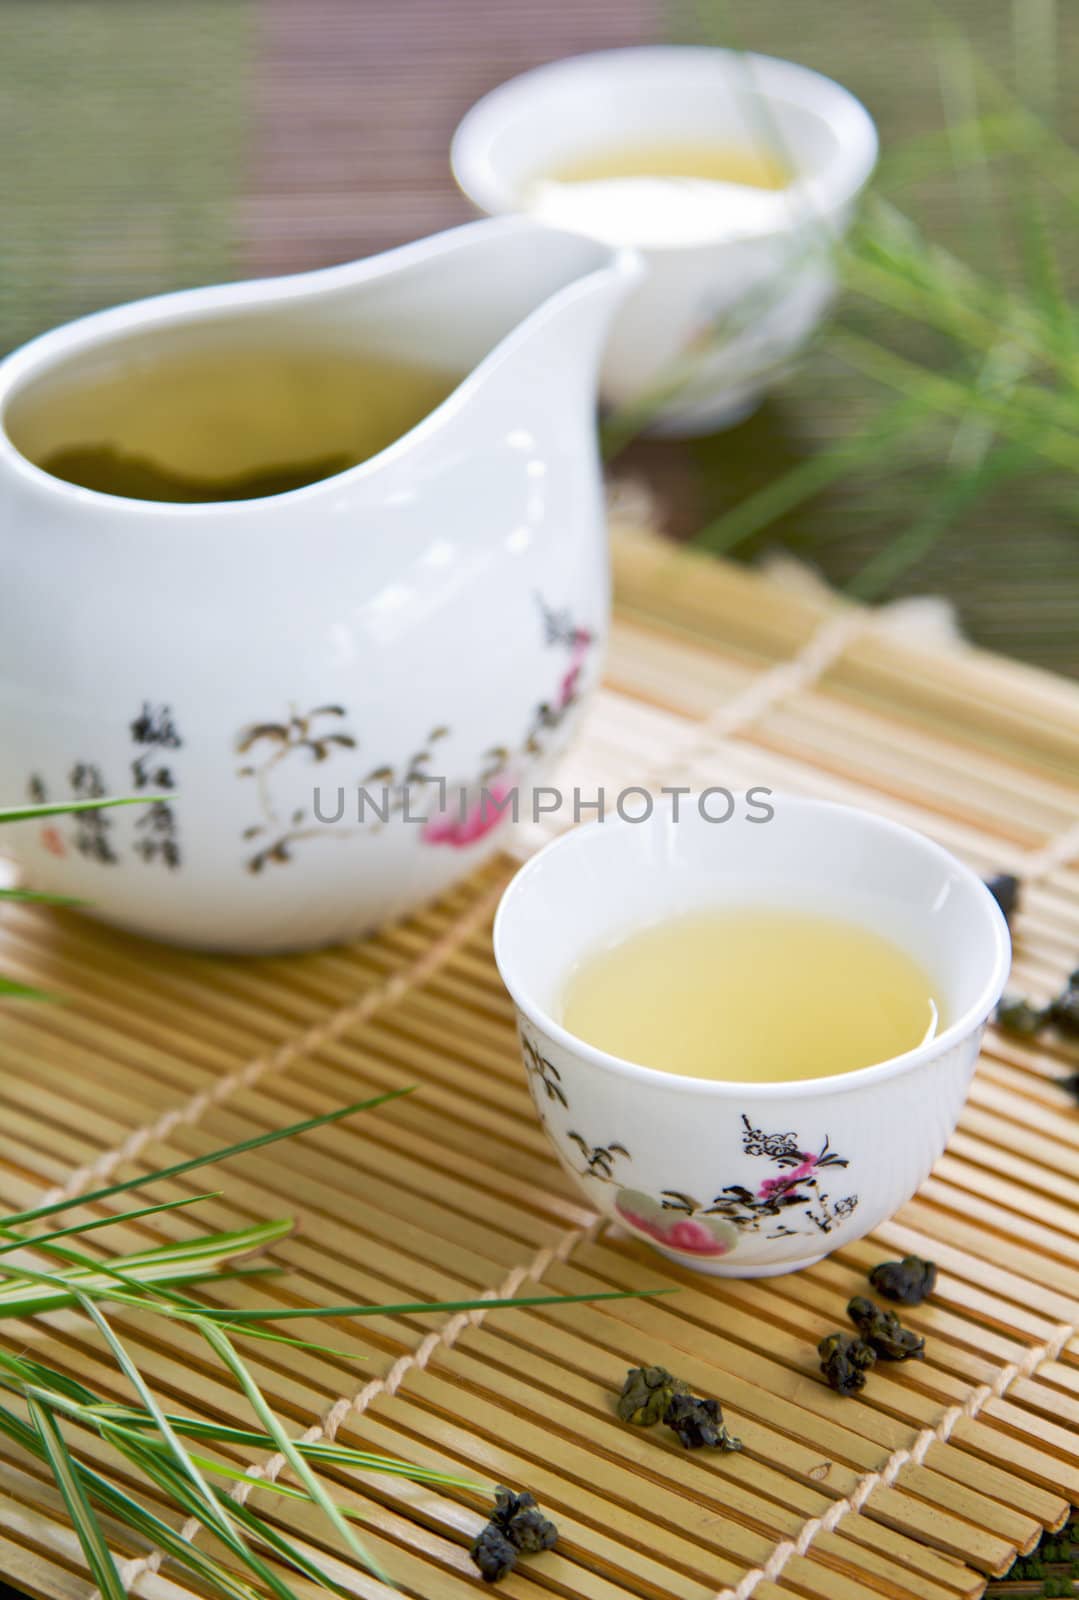 Oolong Tea by vanillaechoes